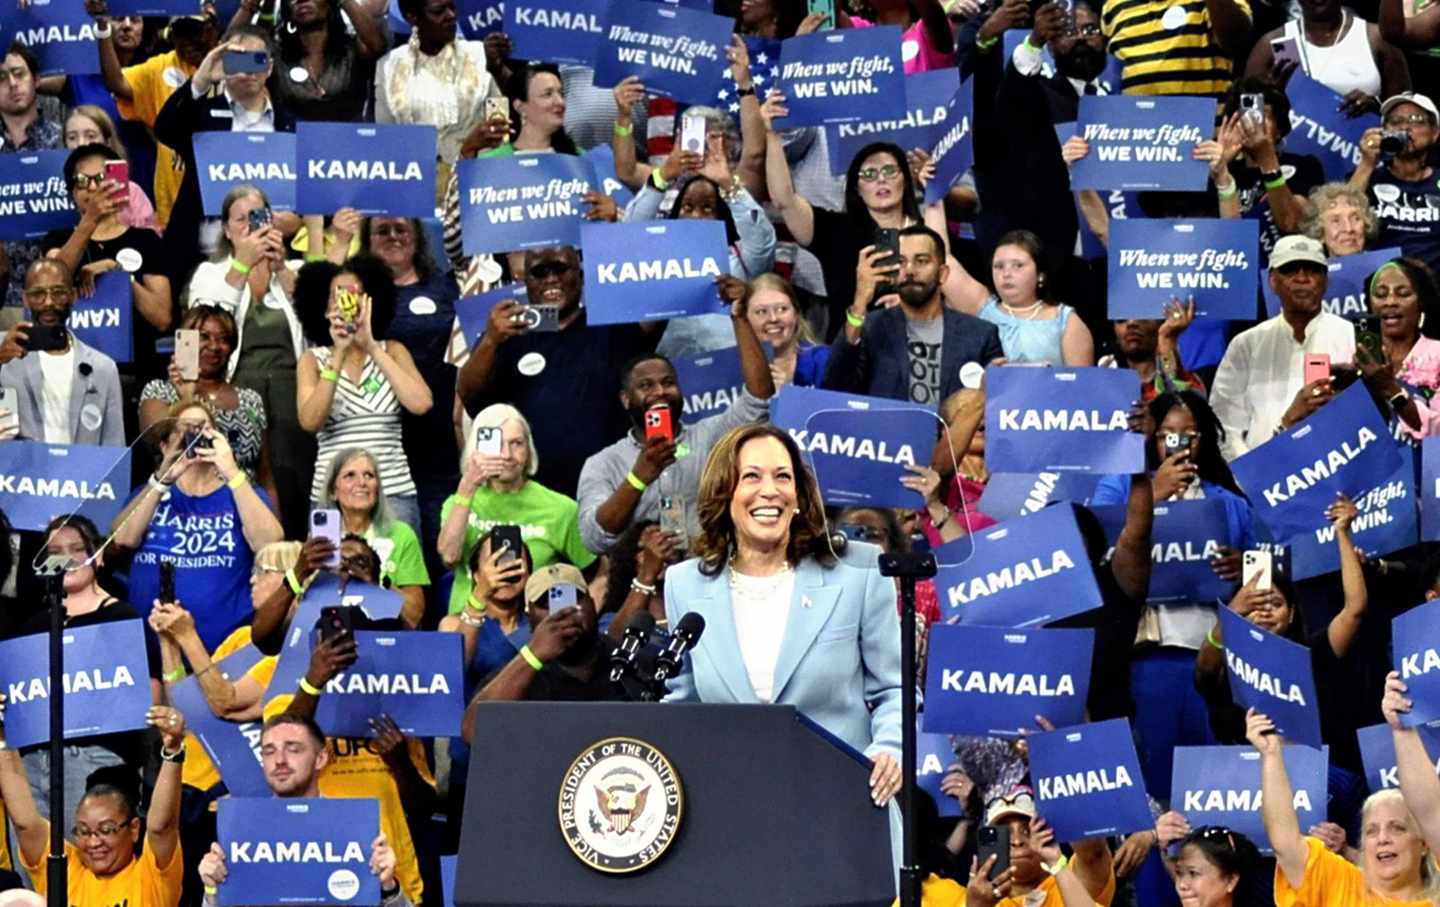 Vice President Kamala Harris smiles at a podium, in front of many people holding signs reading 